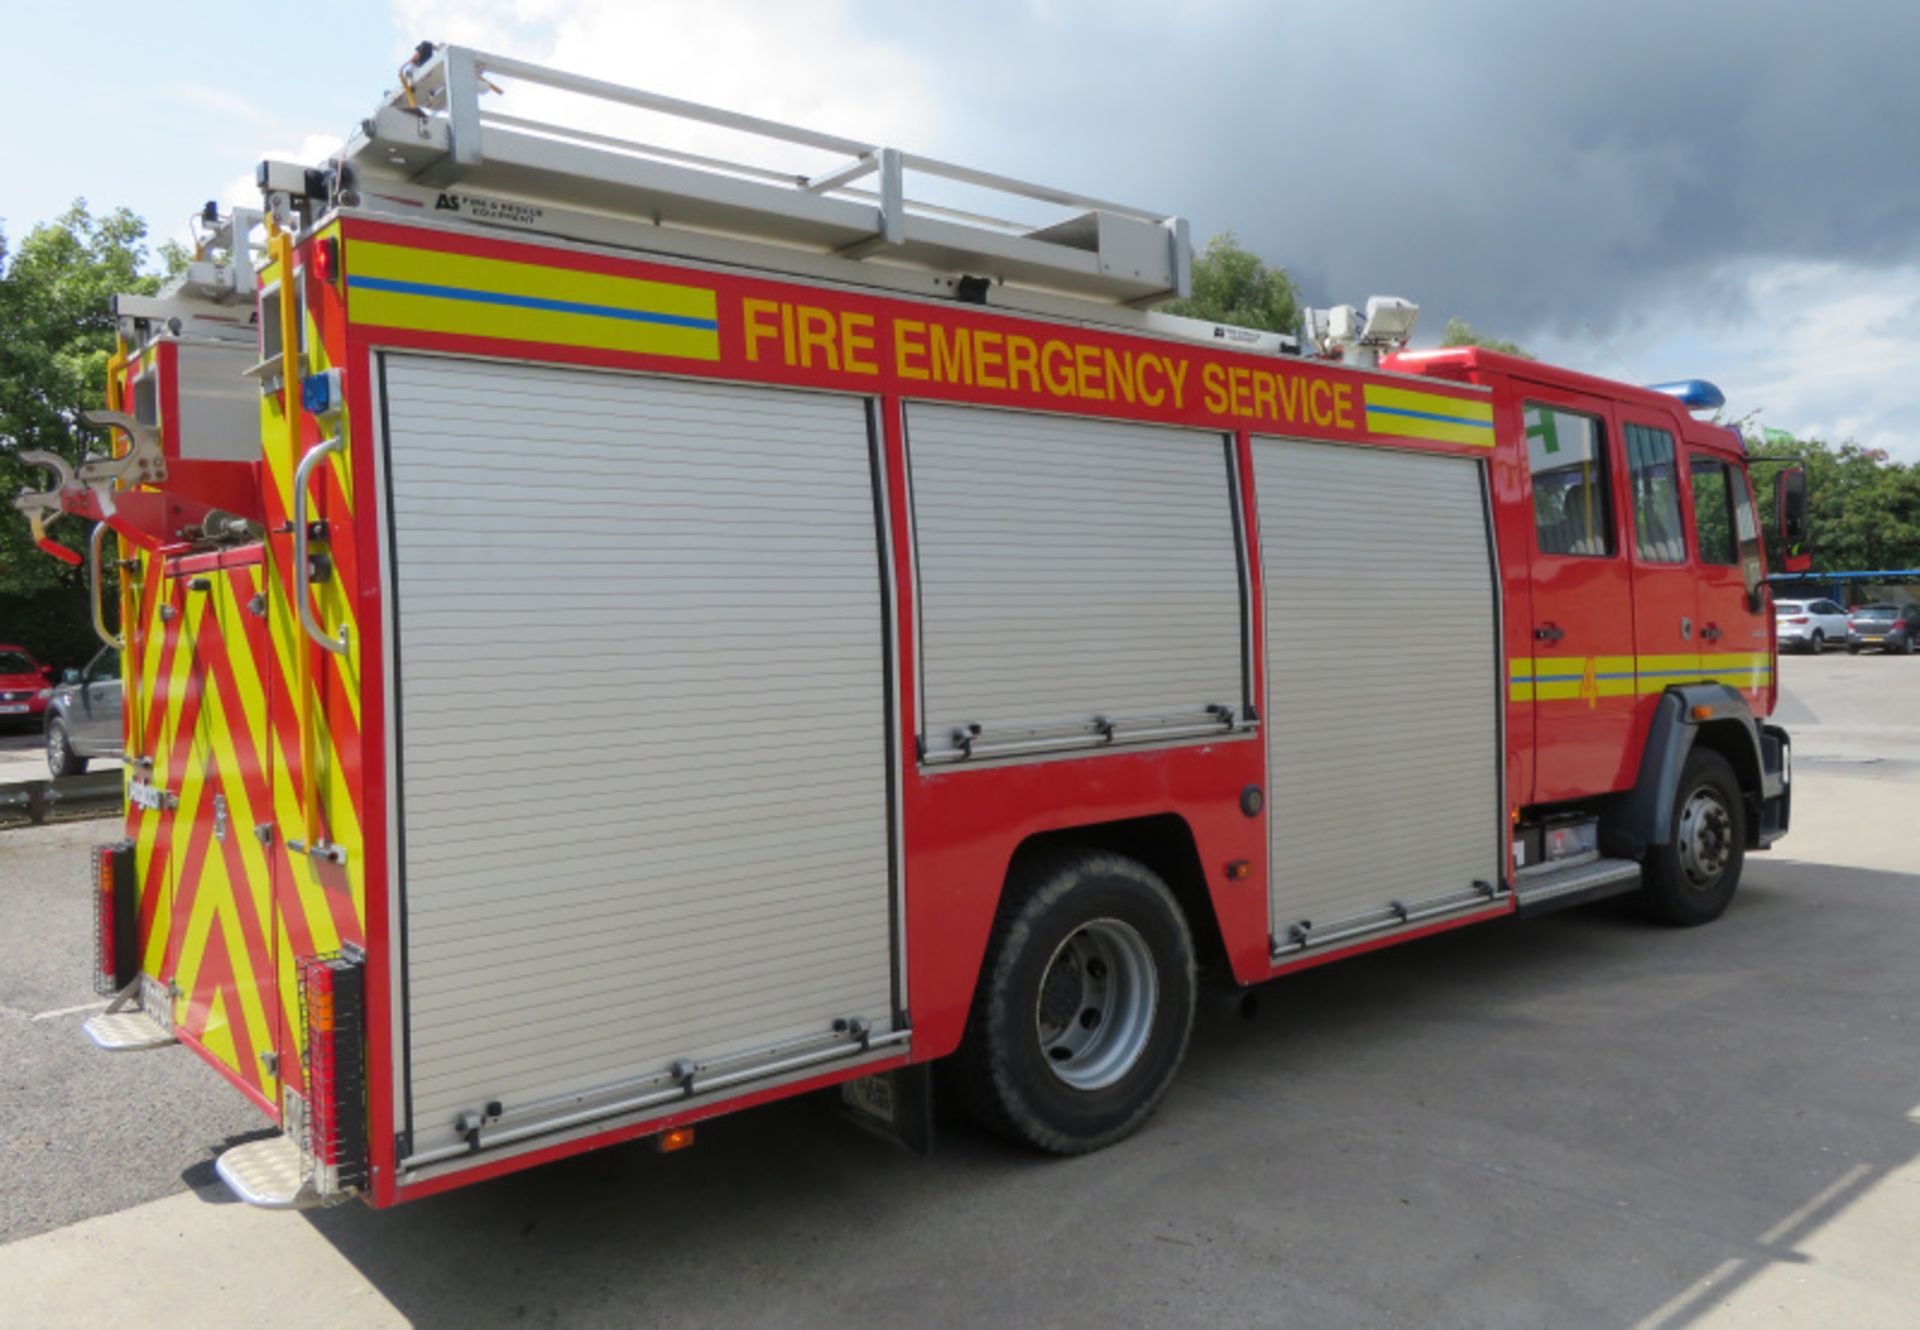 Man Angloco Fire Engine - LE15.220 - 52788 miles - winch - Unit been used 713hr - 6871CC - Image 6 of 35